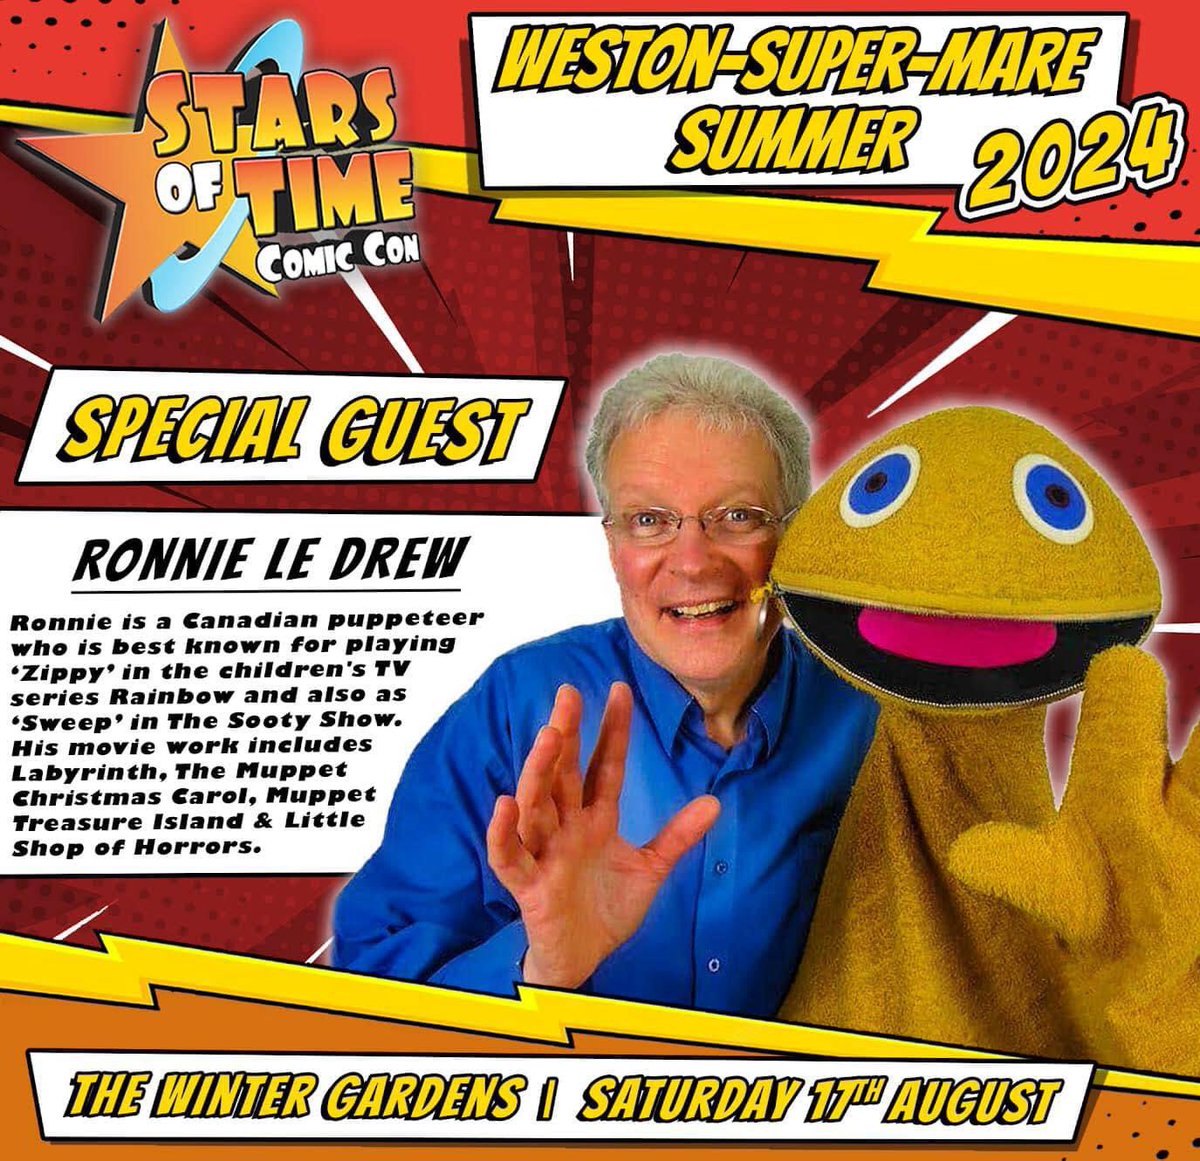 Meet RONNIE LE DREW 🌈 STARS OF TIME COMIC CON Sat 17th August THE WINTER GARDENS @Punchand @WestonSeafront #ComicCon @visitweston #cosplay @VisitBristol @WestonSeafront @SuperWeston #zippy #sooty #puppet 

Book Your Tickets at: eventbrite.co.uk/e/stars-of-tim…